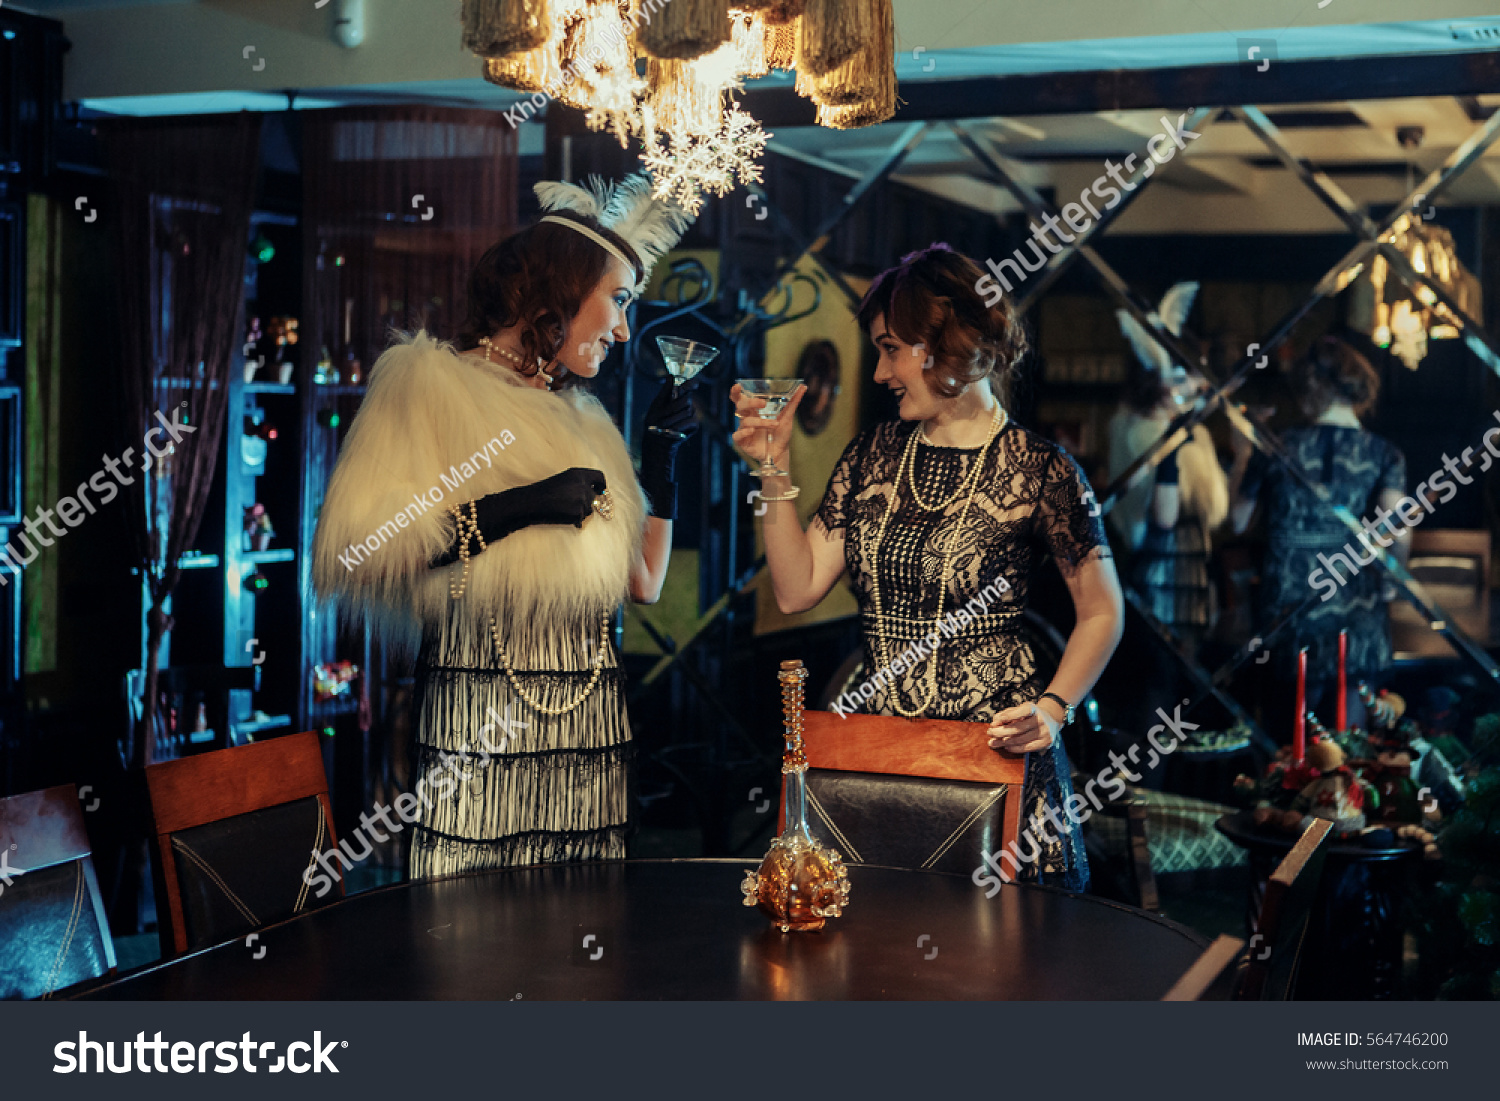 20s style concept. Two pretty ladies in vintage dresses dancing and drinking in old-fashioned interior. Having fun  #564746200